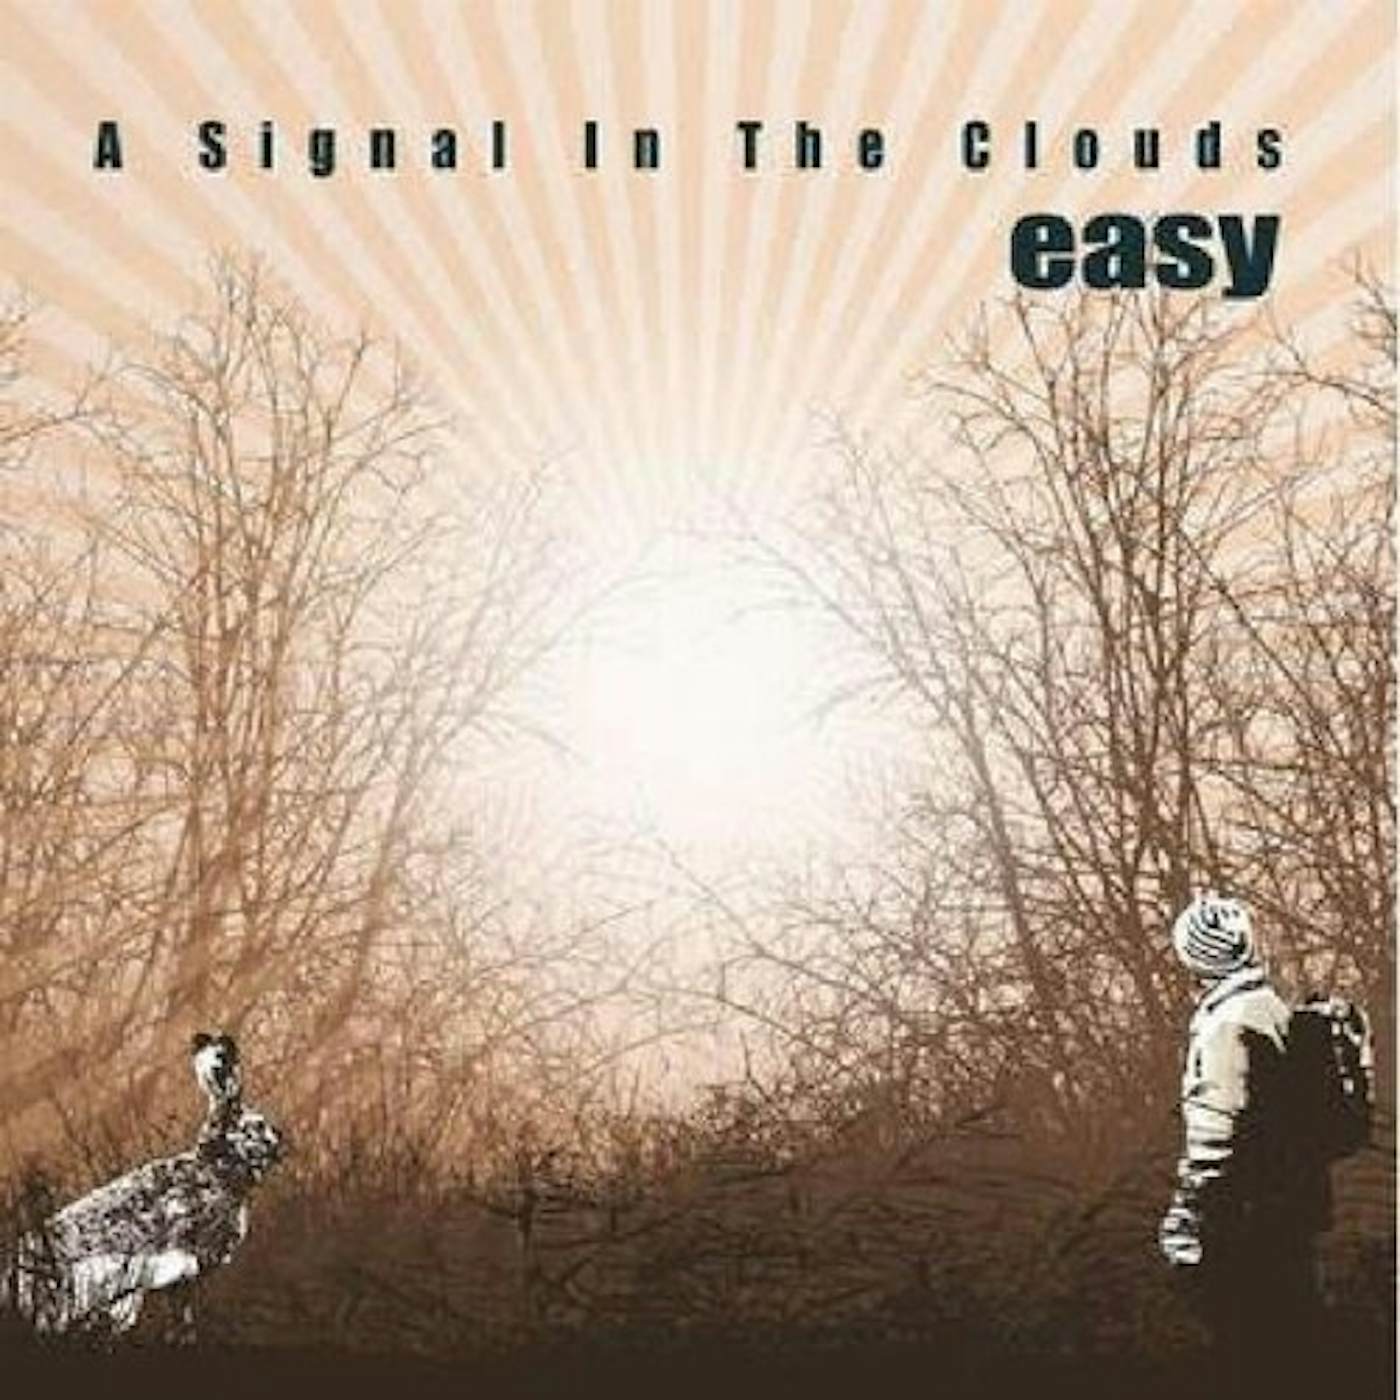 Easy SIGNAL IN THE CLOUDS CD